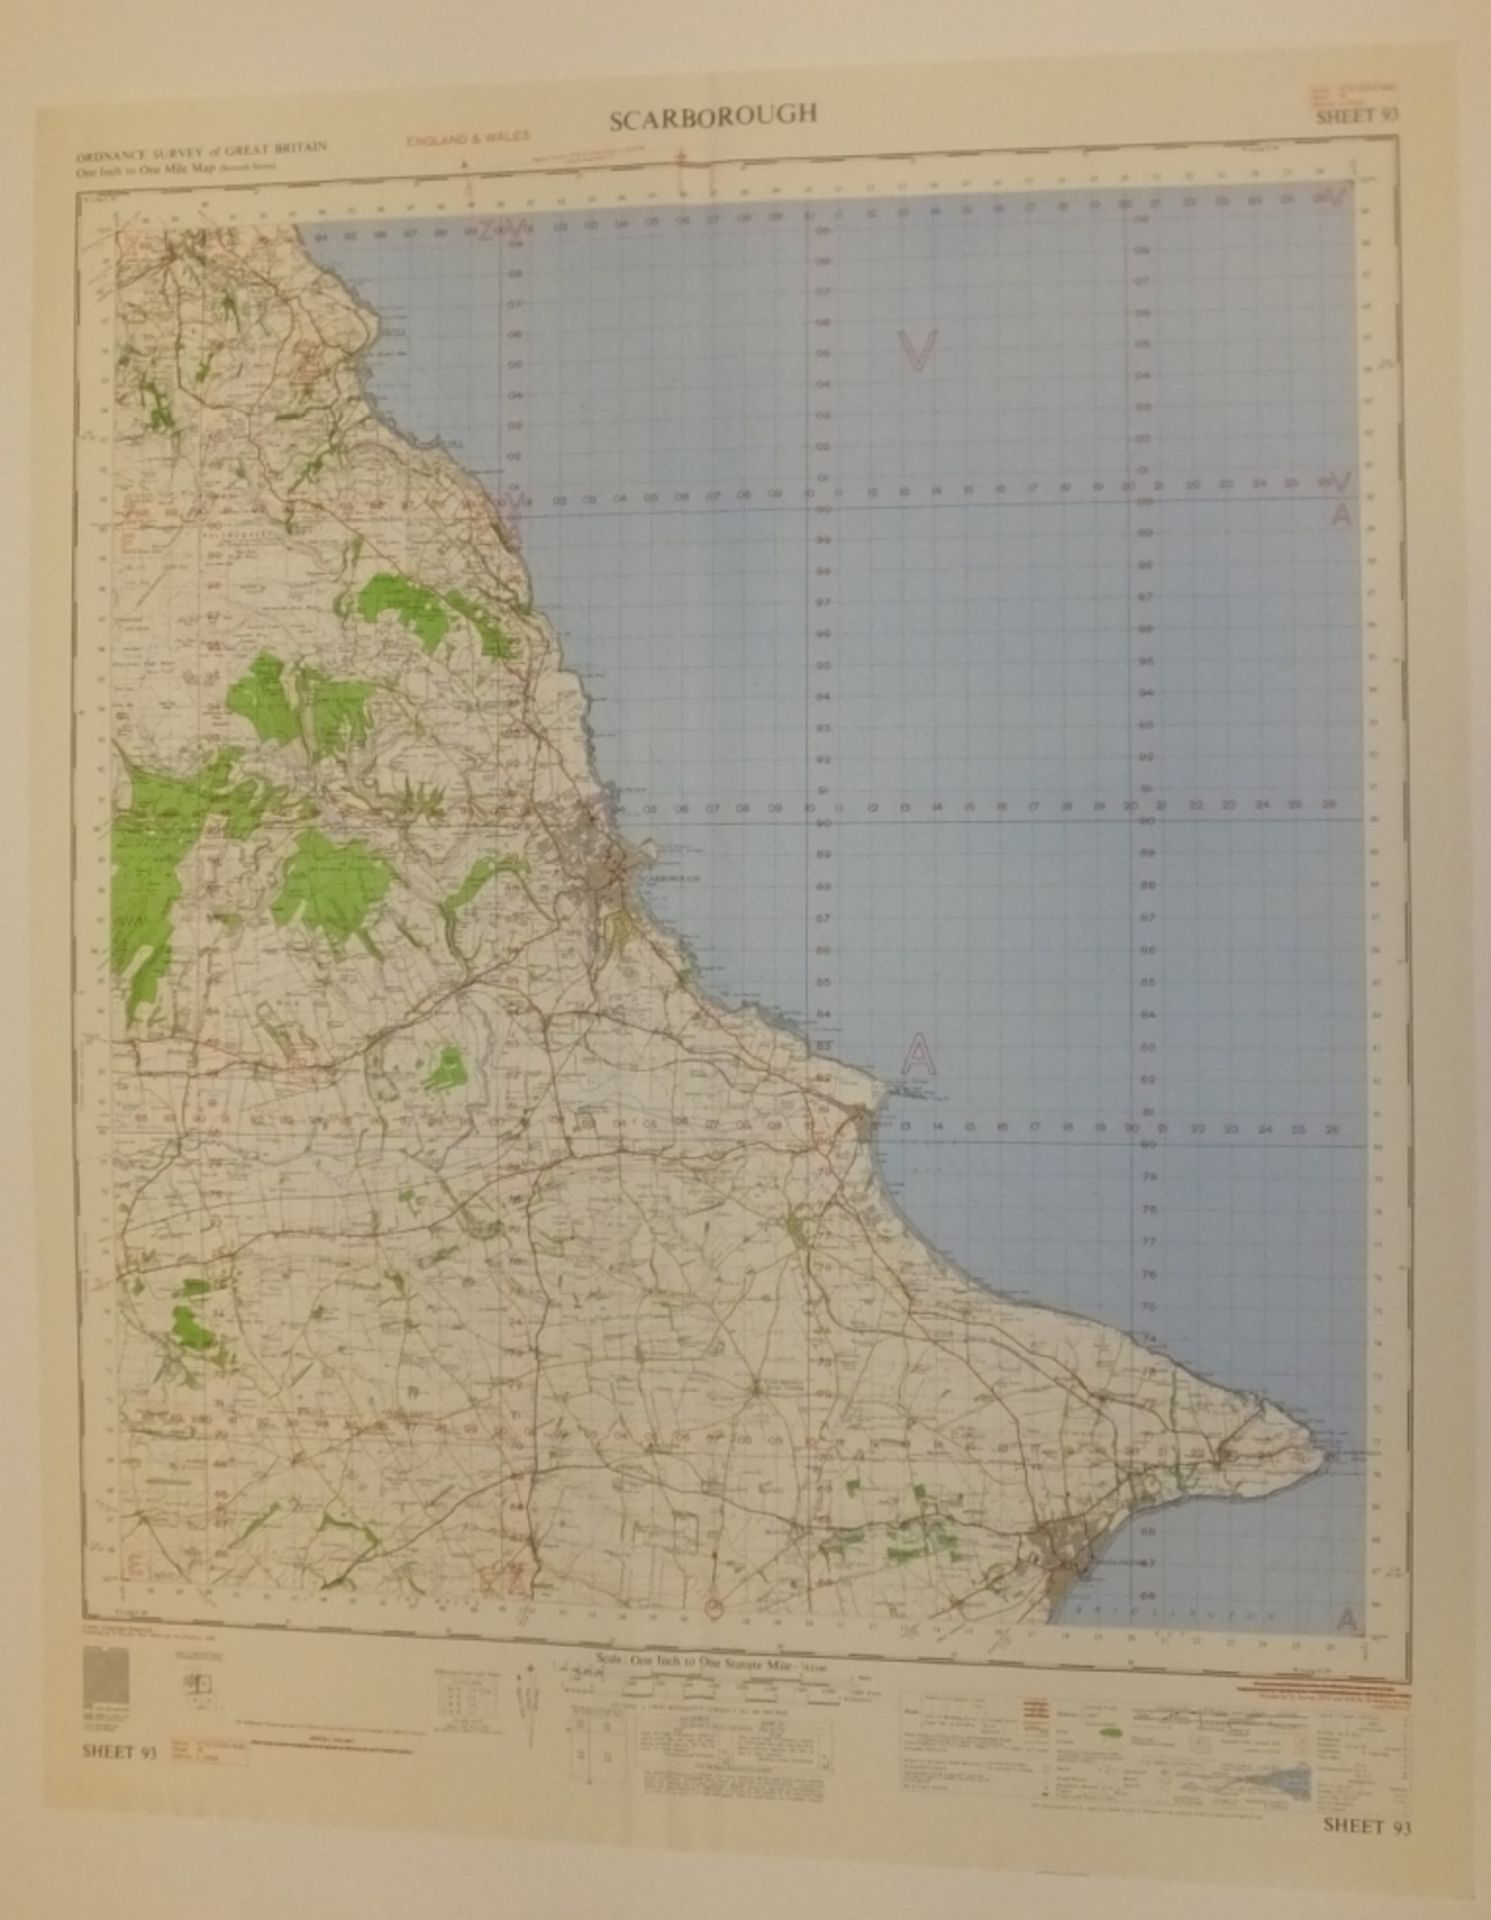 22x ENGLAND & WALES MAP SCARBOROUGH 1INCH 1MILE 1958 3 EDITION 4620 GSGS SHEET 93